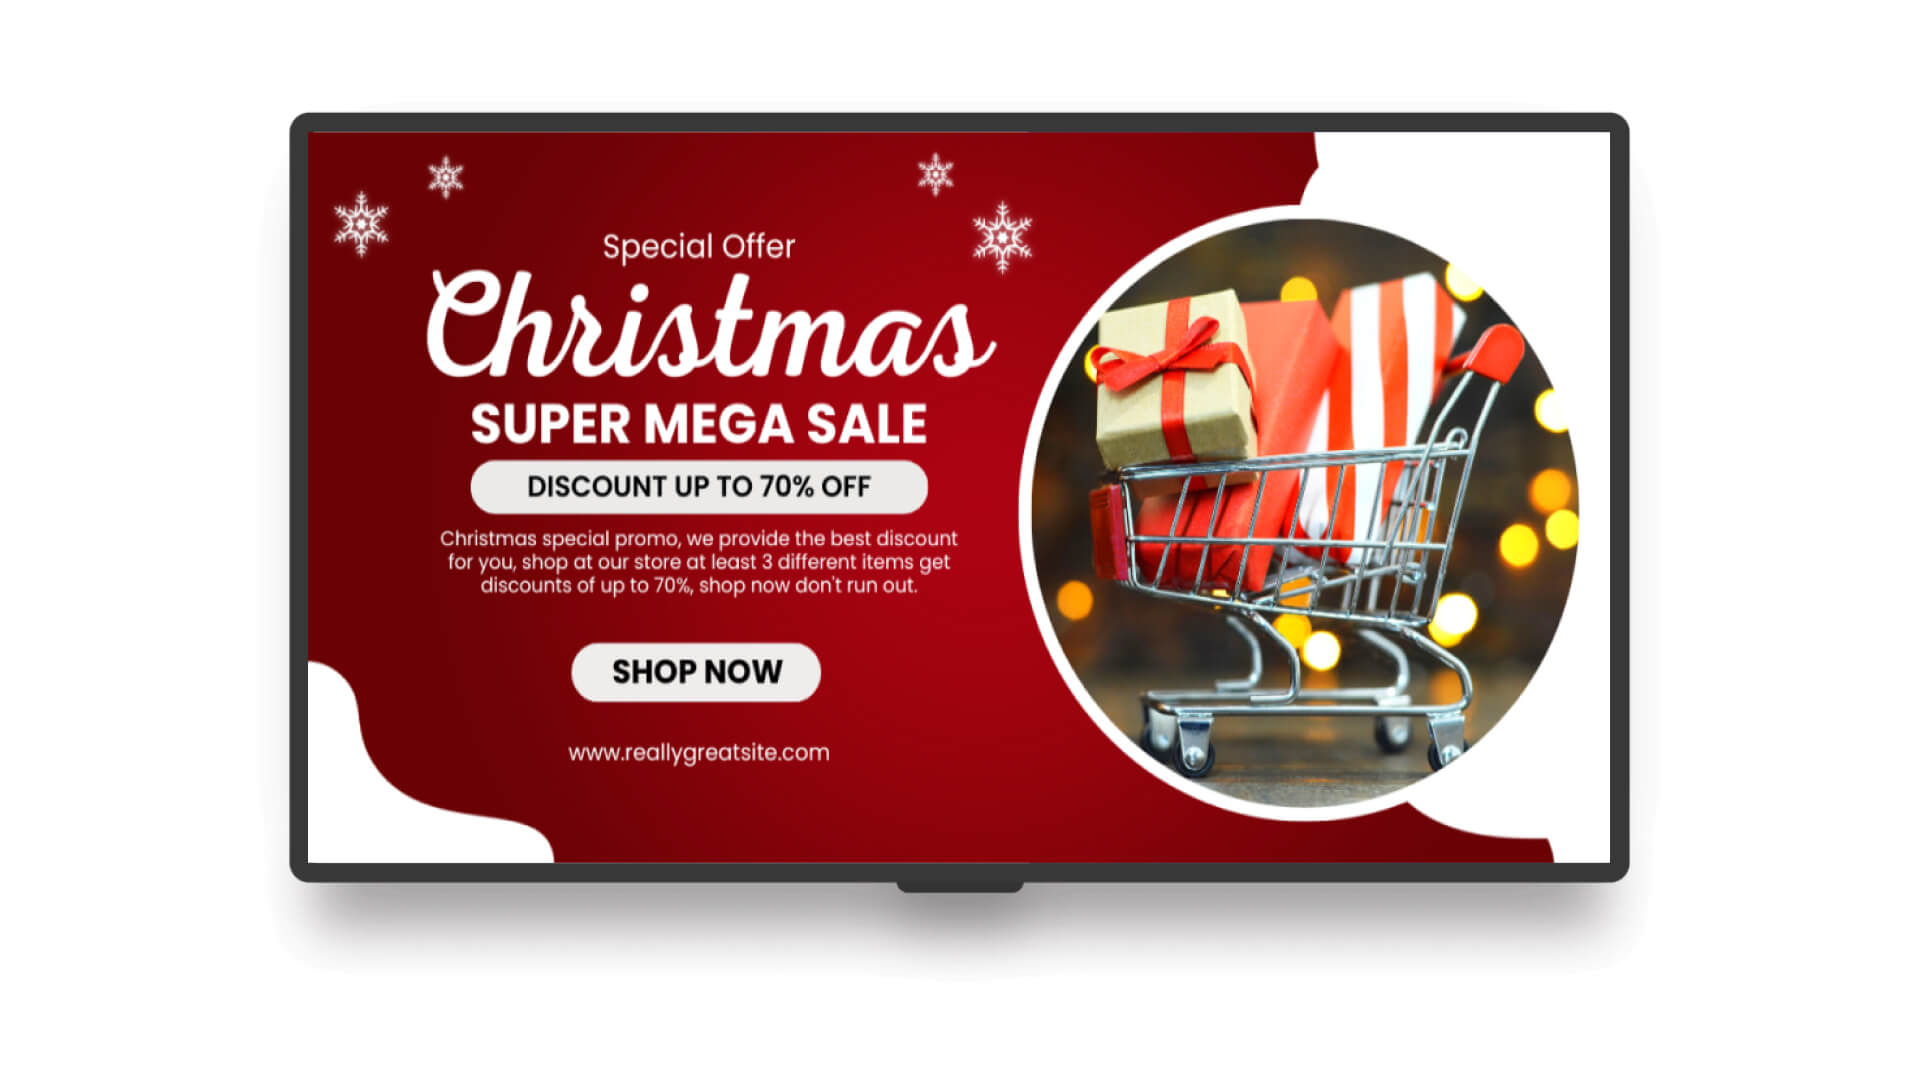 Christmas holiday templates for live event streaming on digital signage.